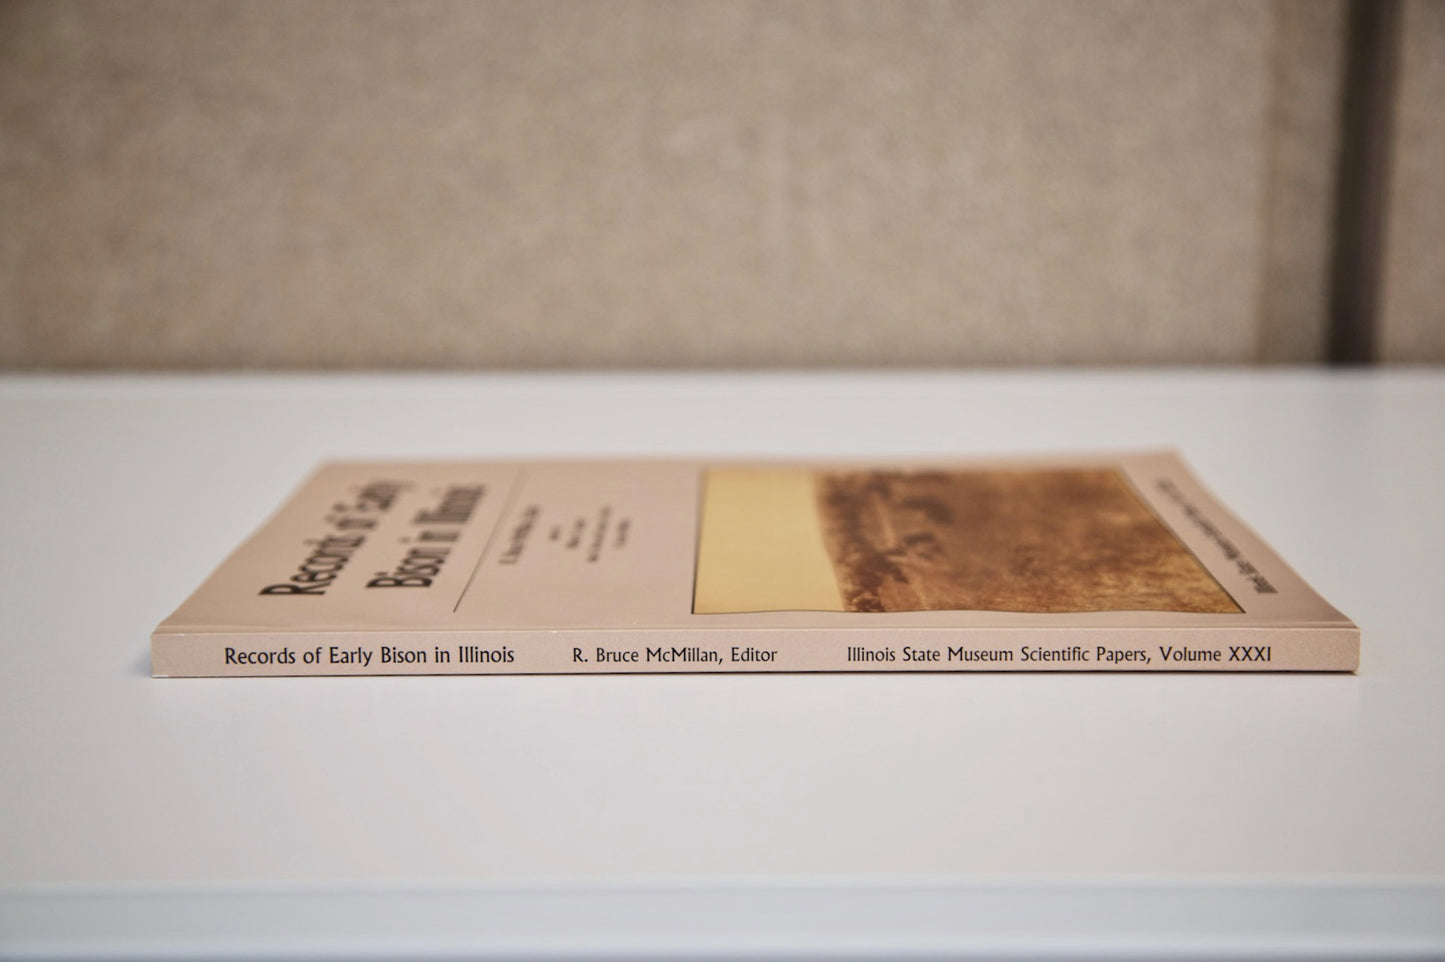 A flat, side view of the book “Records of Early Bison in Illinois.”